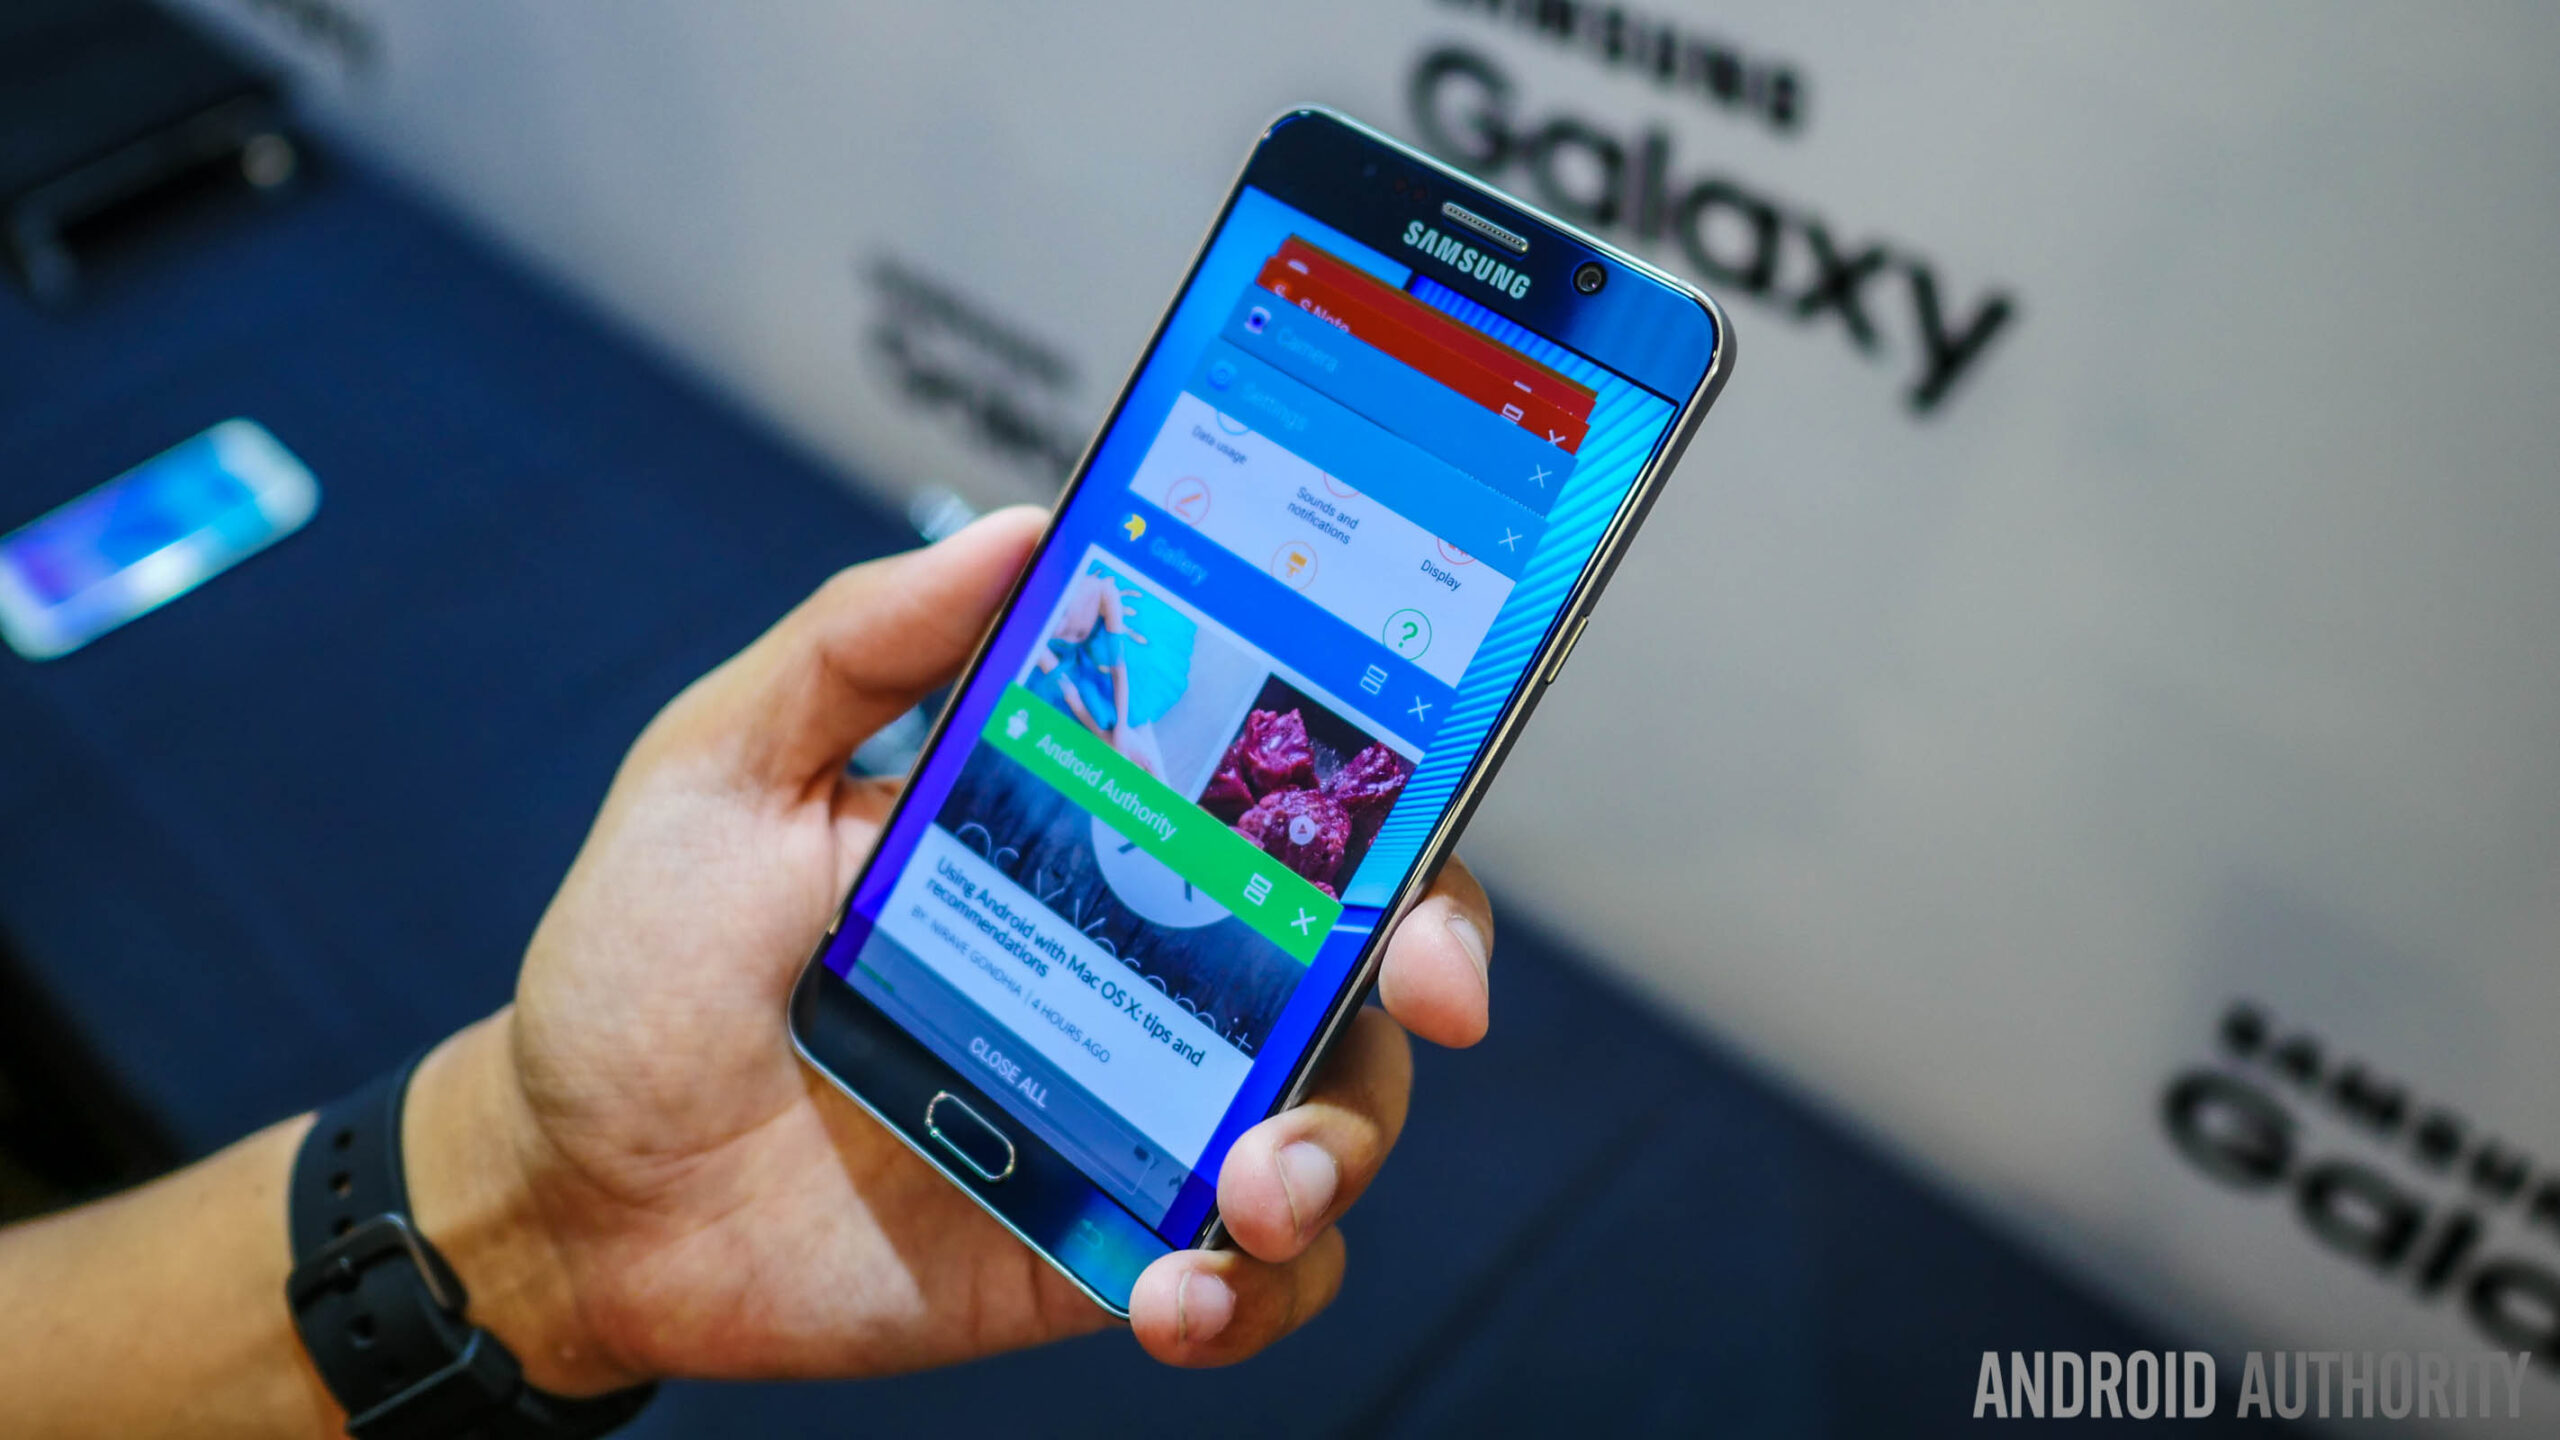 samsung galaxy note 5 first look aa (37 of 41)